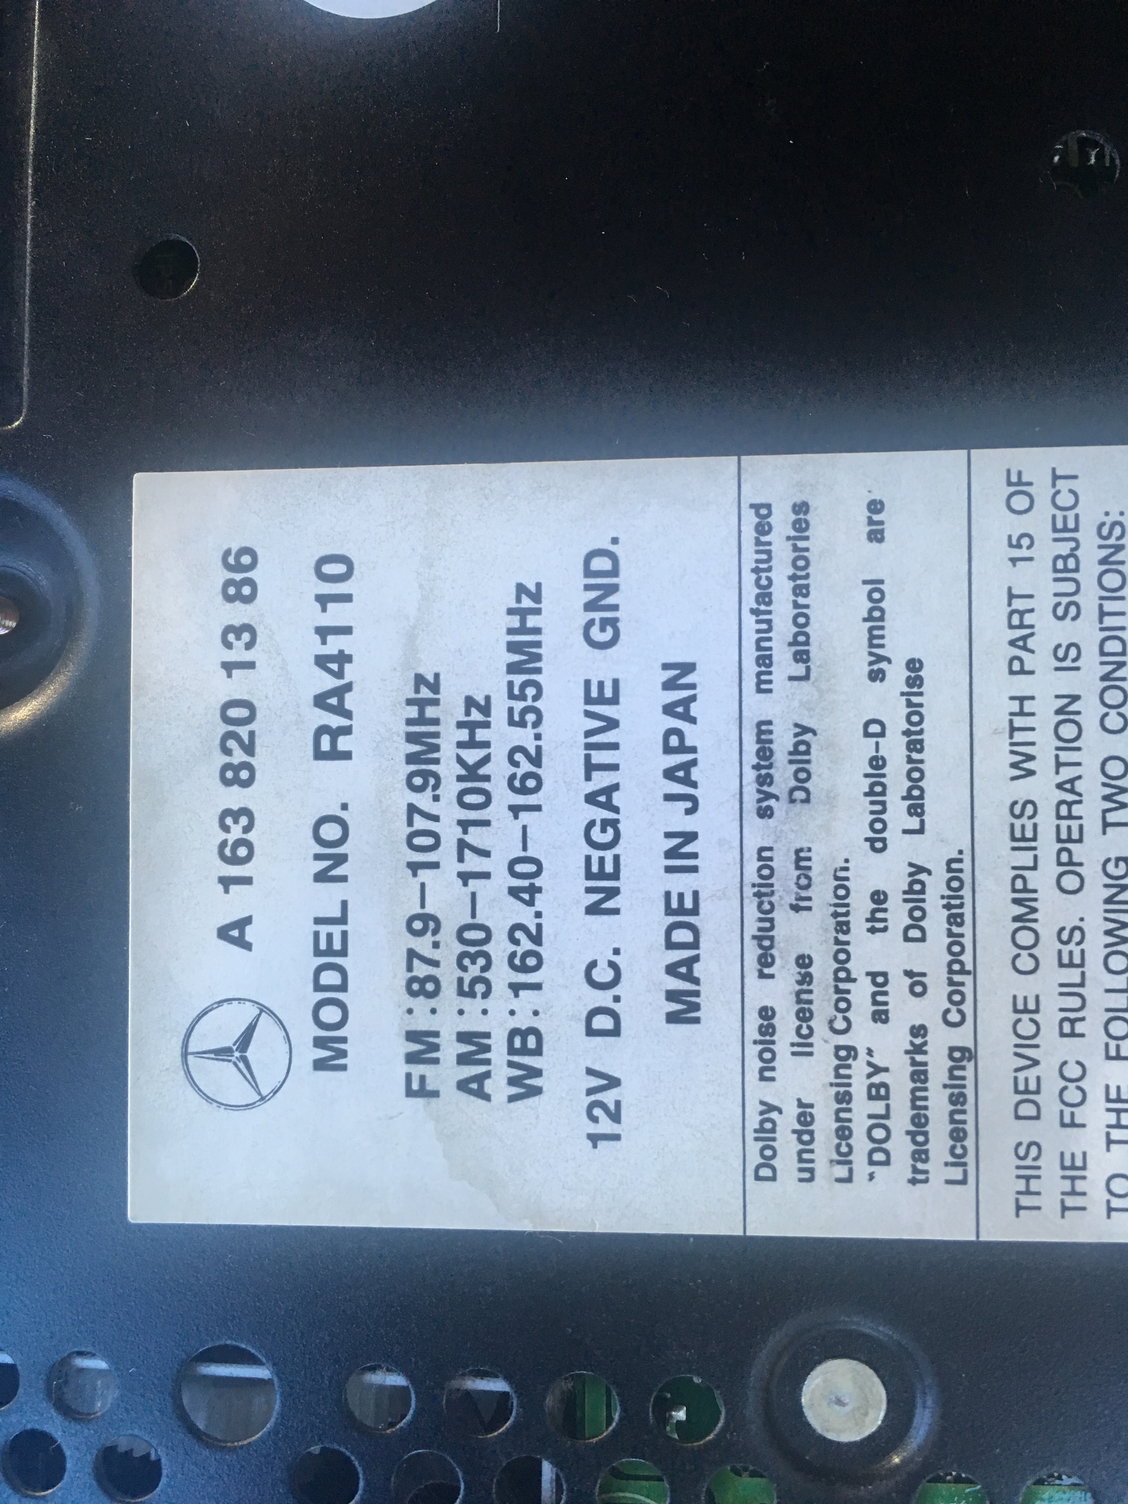 I have the serial number, can someone confirm radio code